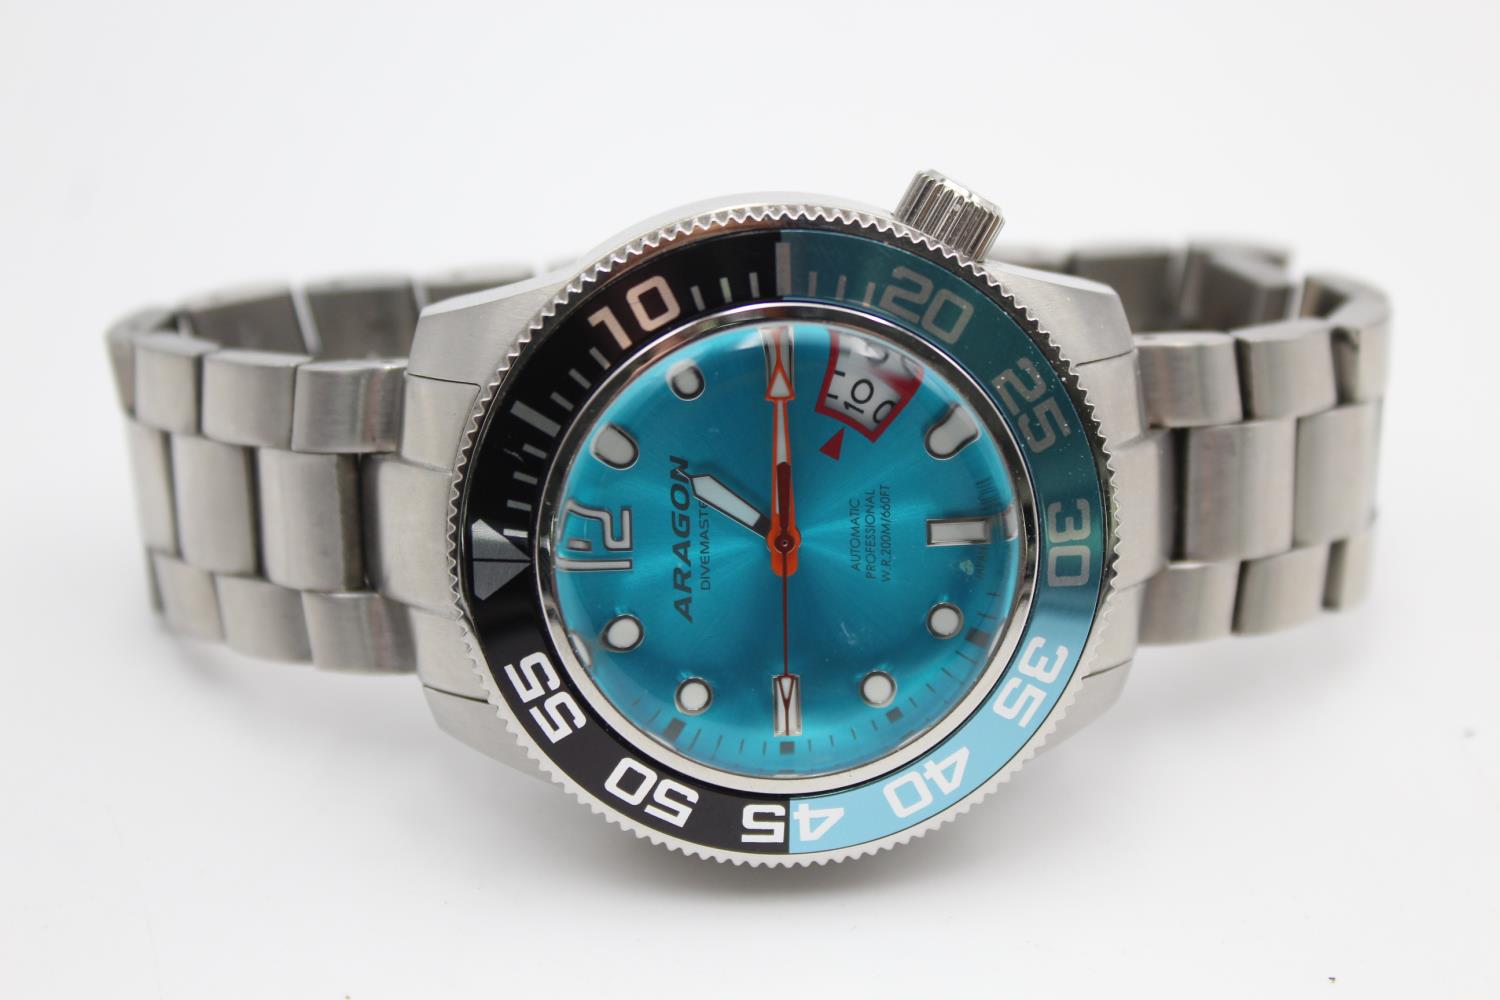 Gents ARAGON Divemaster Mechanical Divers WRISTWATCH Automatic WORKING - Image 2 of 4